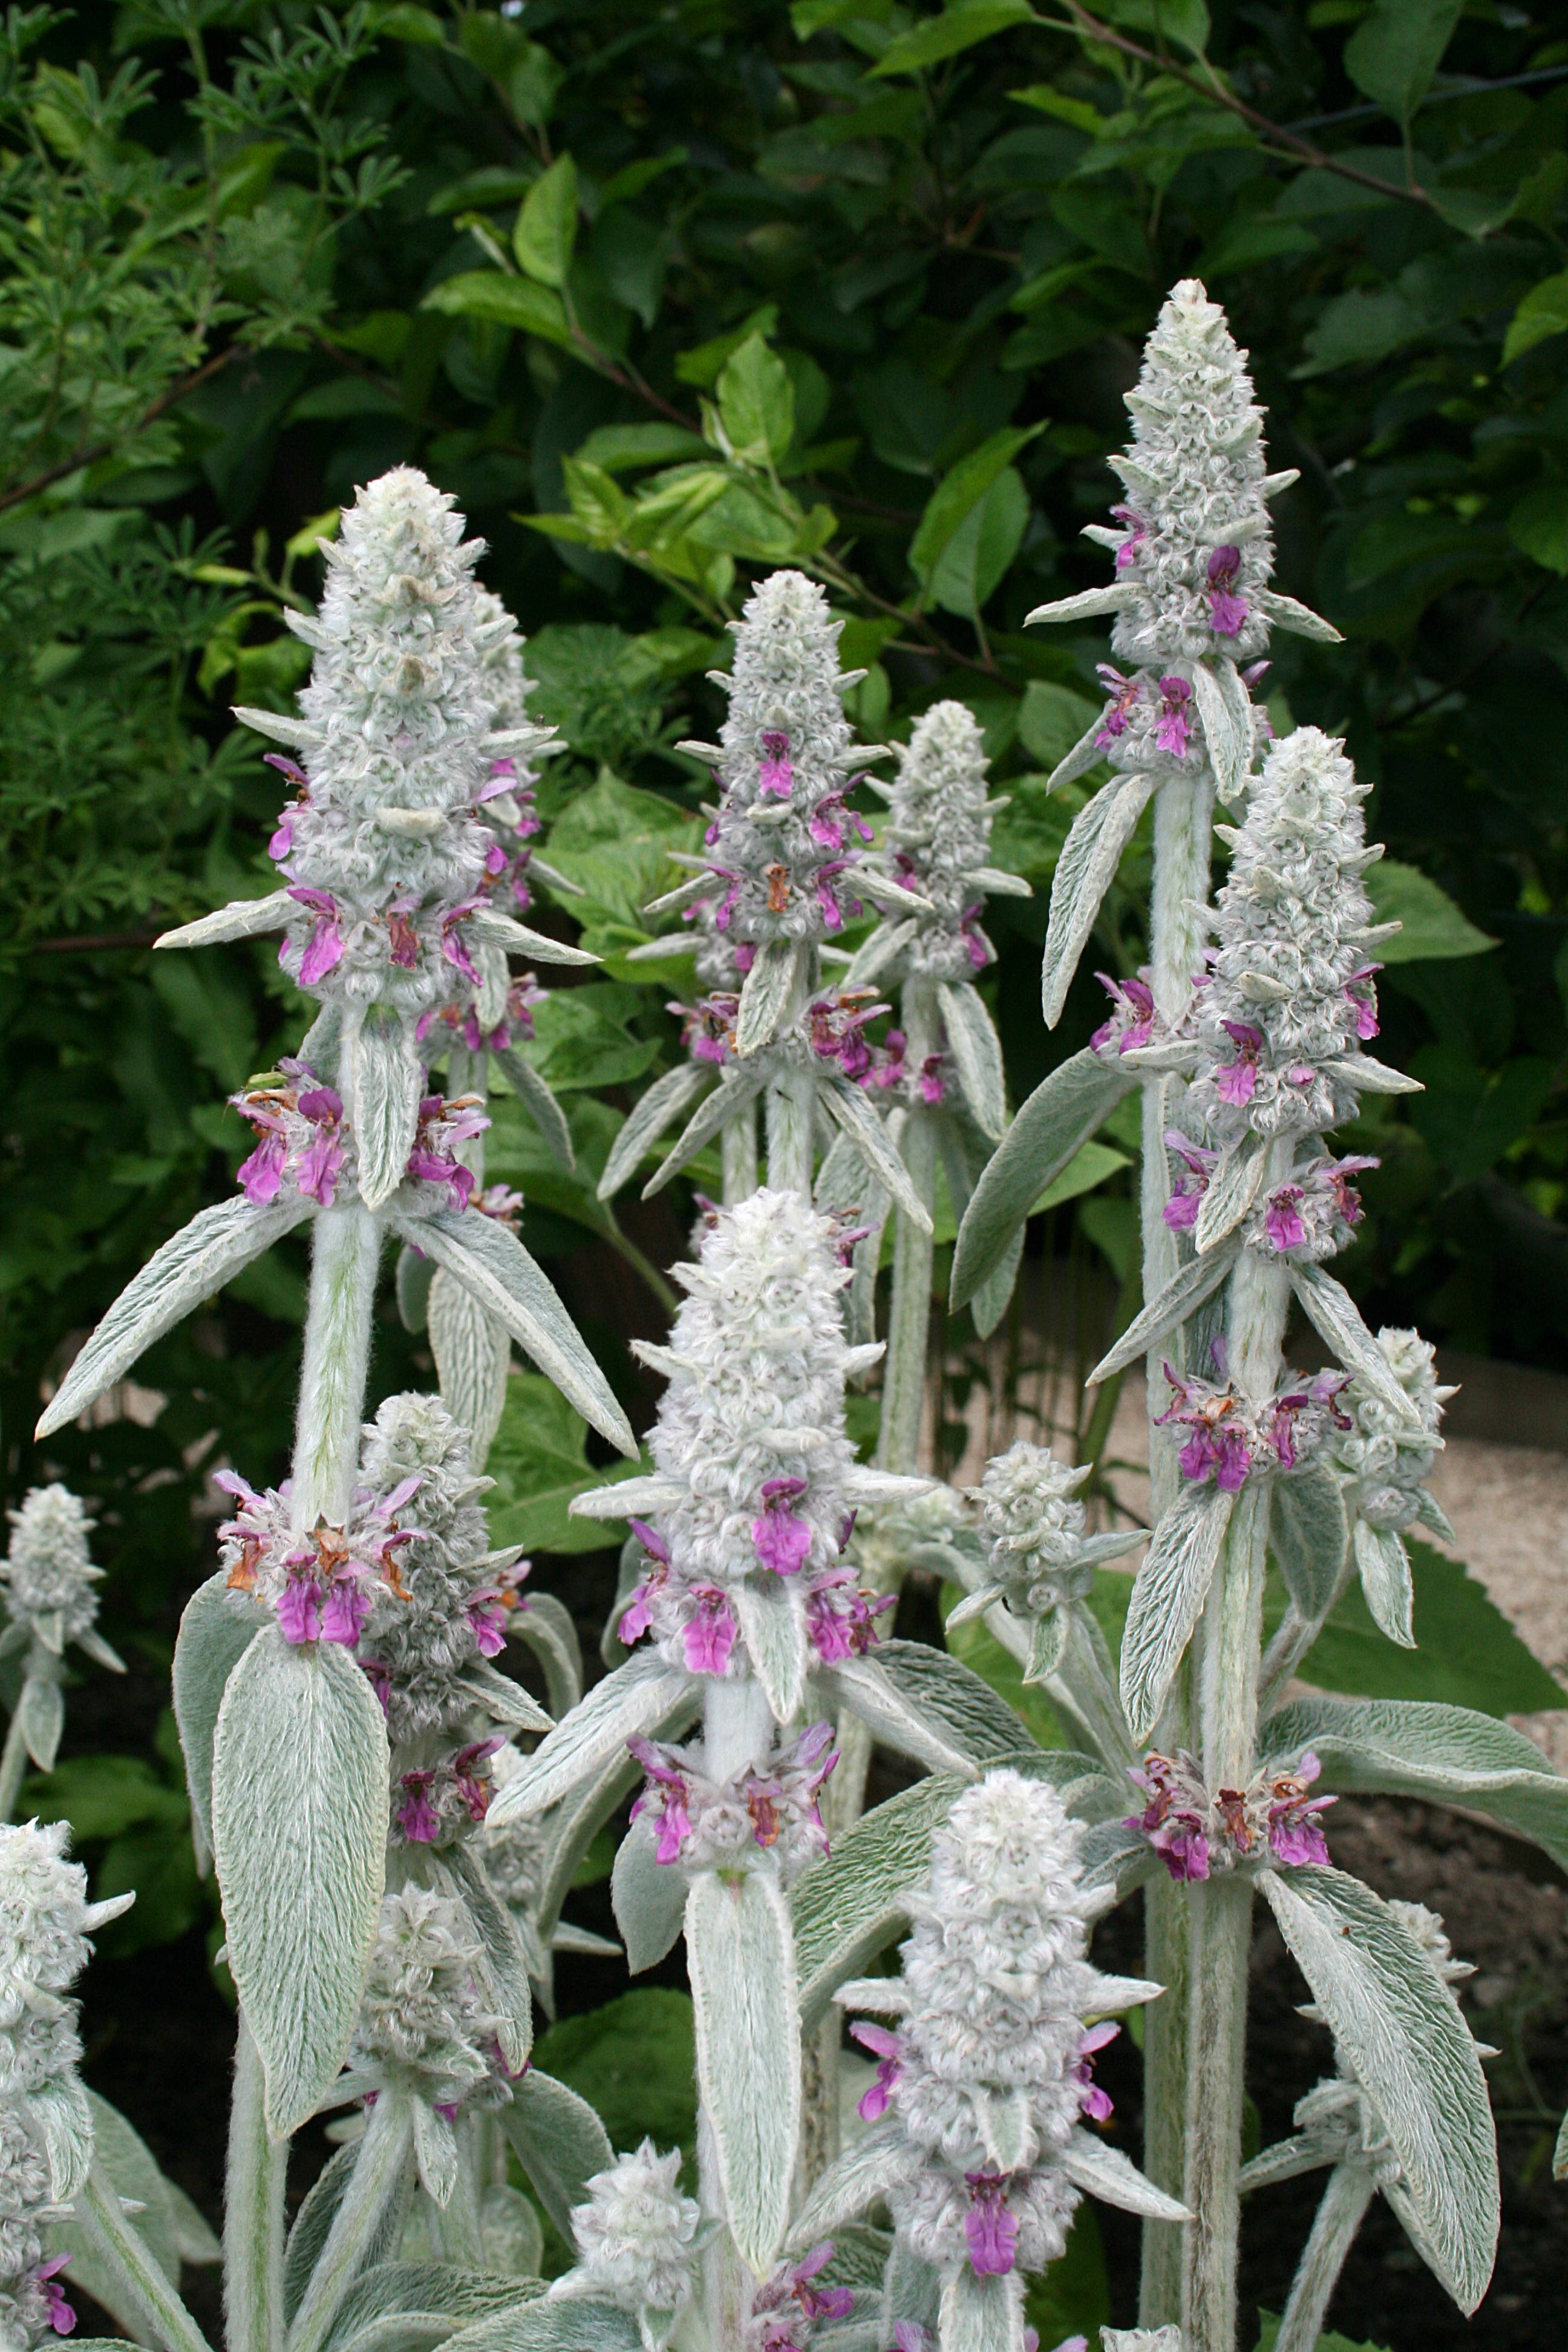 pink-purple flowers with gray-green foliage